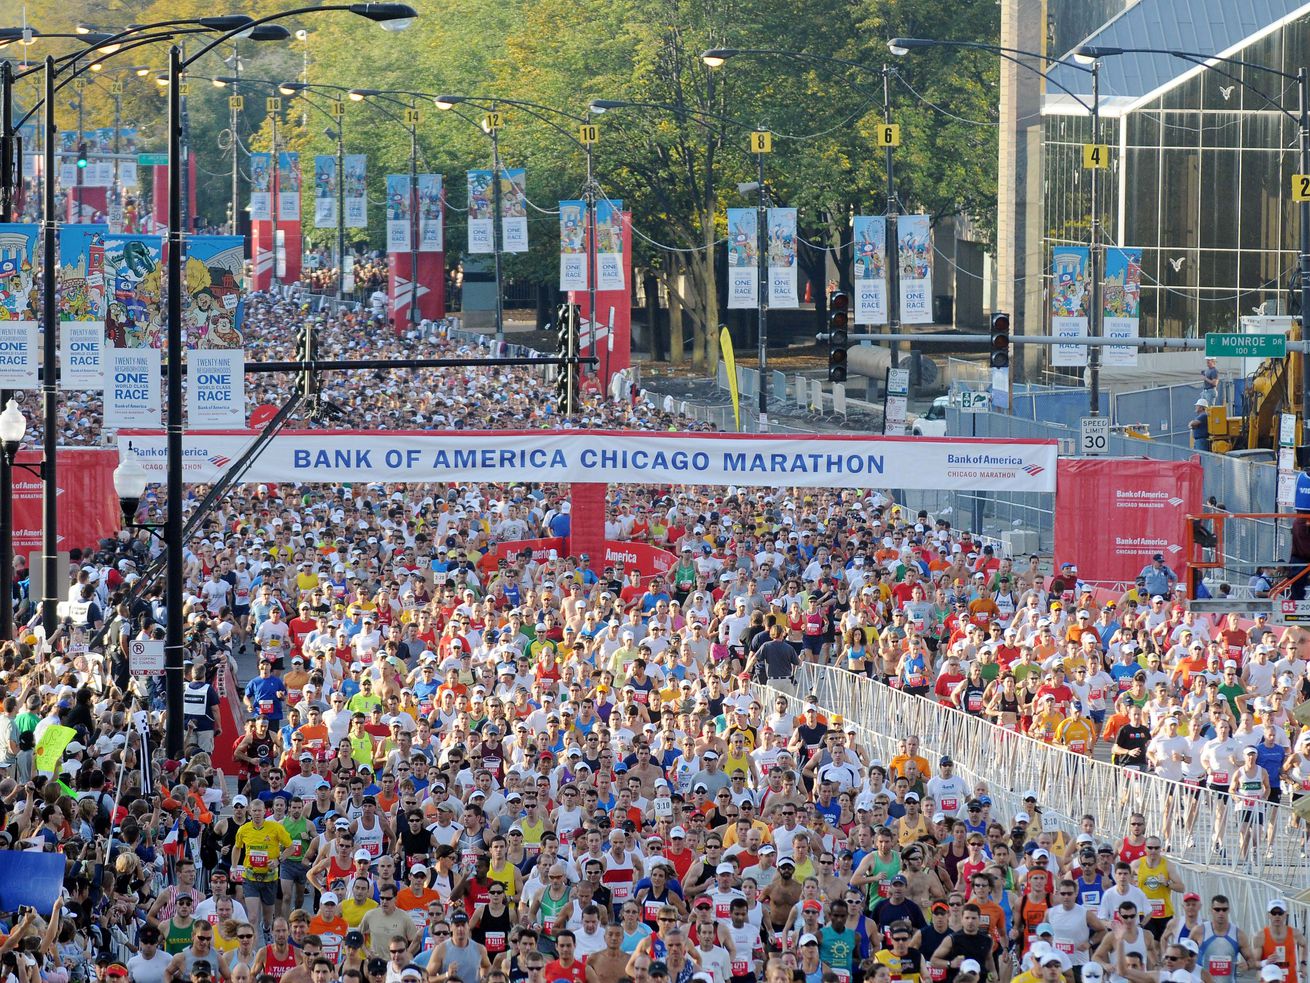 Thousands of runners participate in the Bank of America Chicago Marathon October 12, 2008 in Chicago, Illinois.